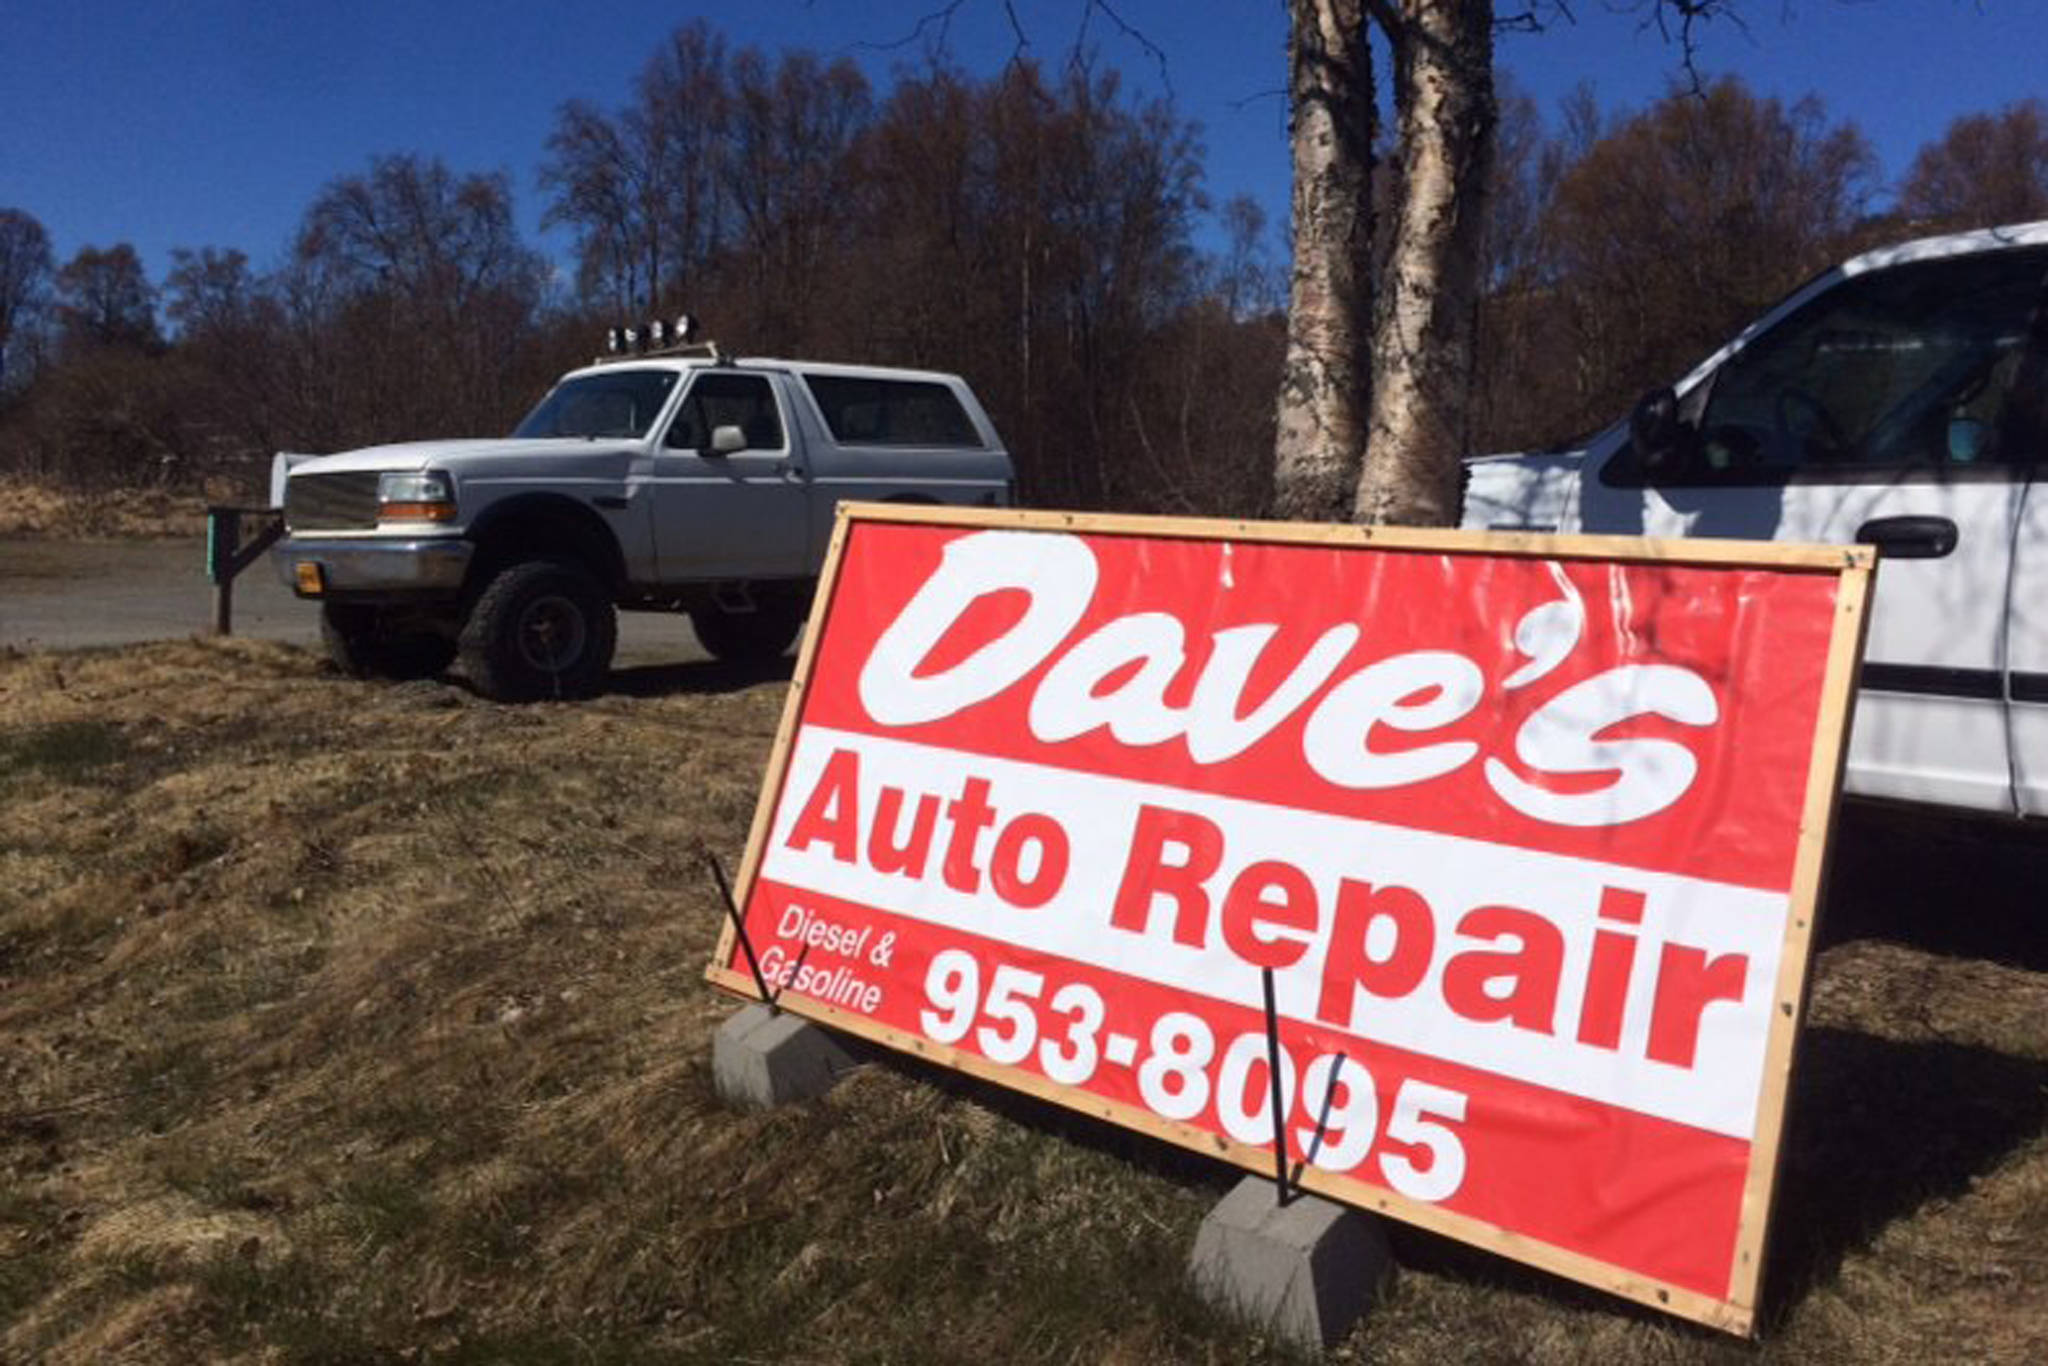 Dave’s Auto Repair, shown here on Friday, April 26, 2019, just outside Homer, Alaska, was targeted with racist vandalism. Owner Dave Johnson discovered the vandalism Friday morning. (Photo courtesy Dave Johnson)